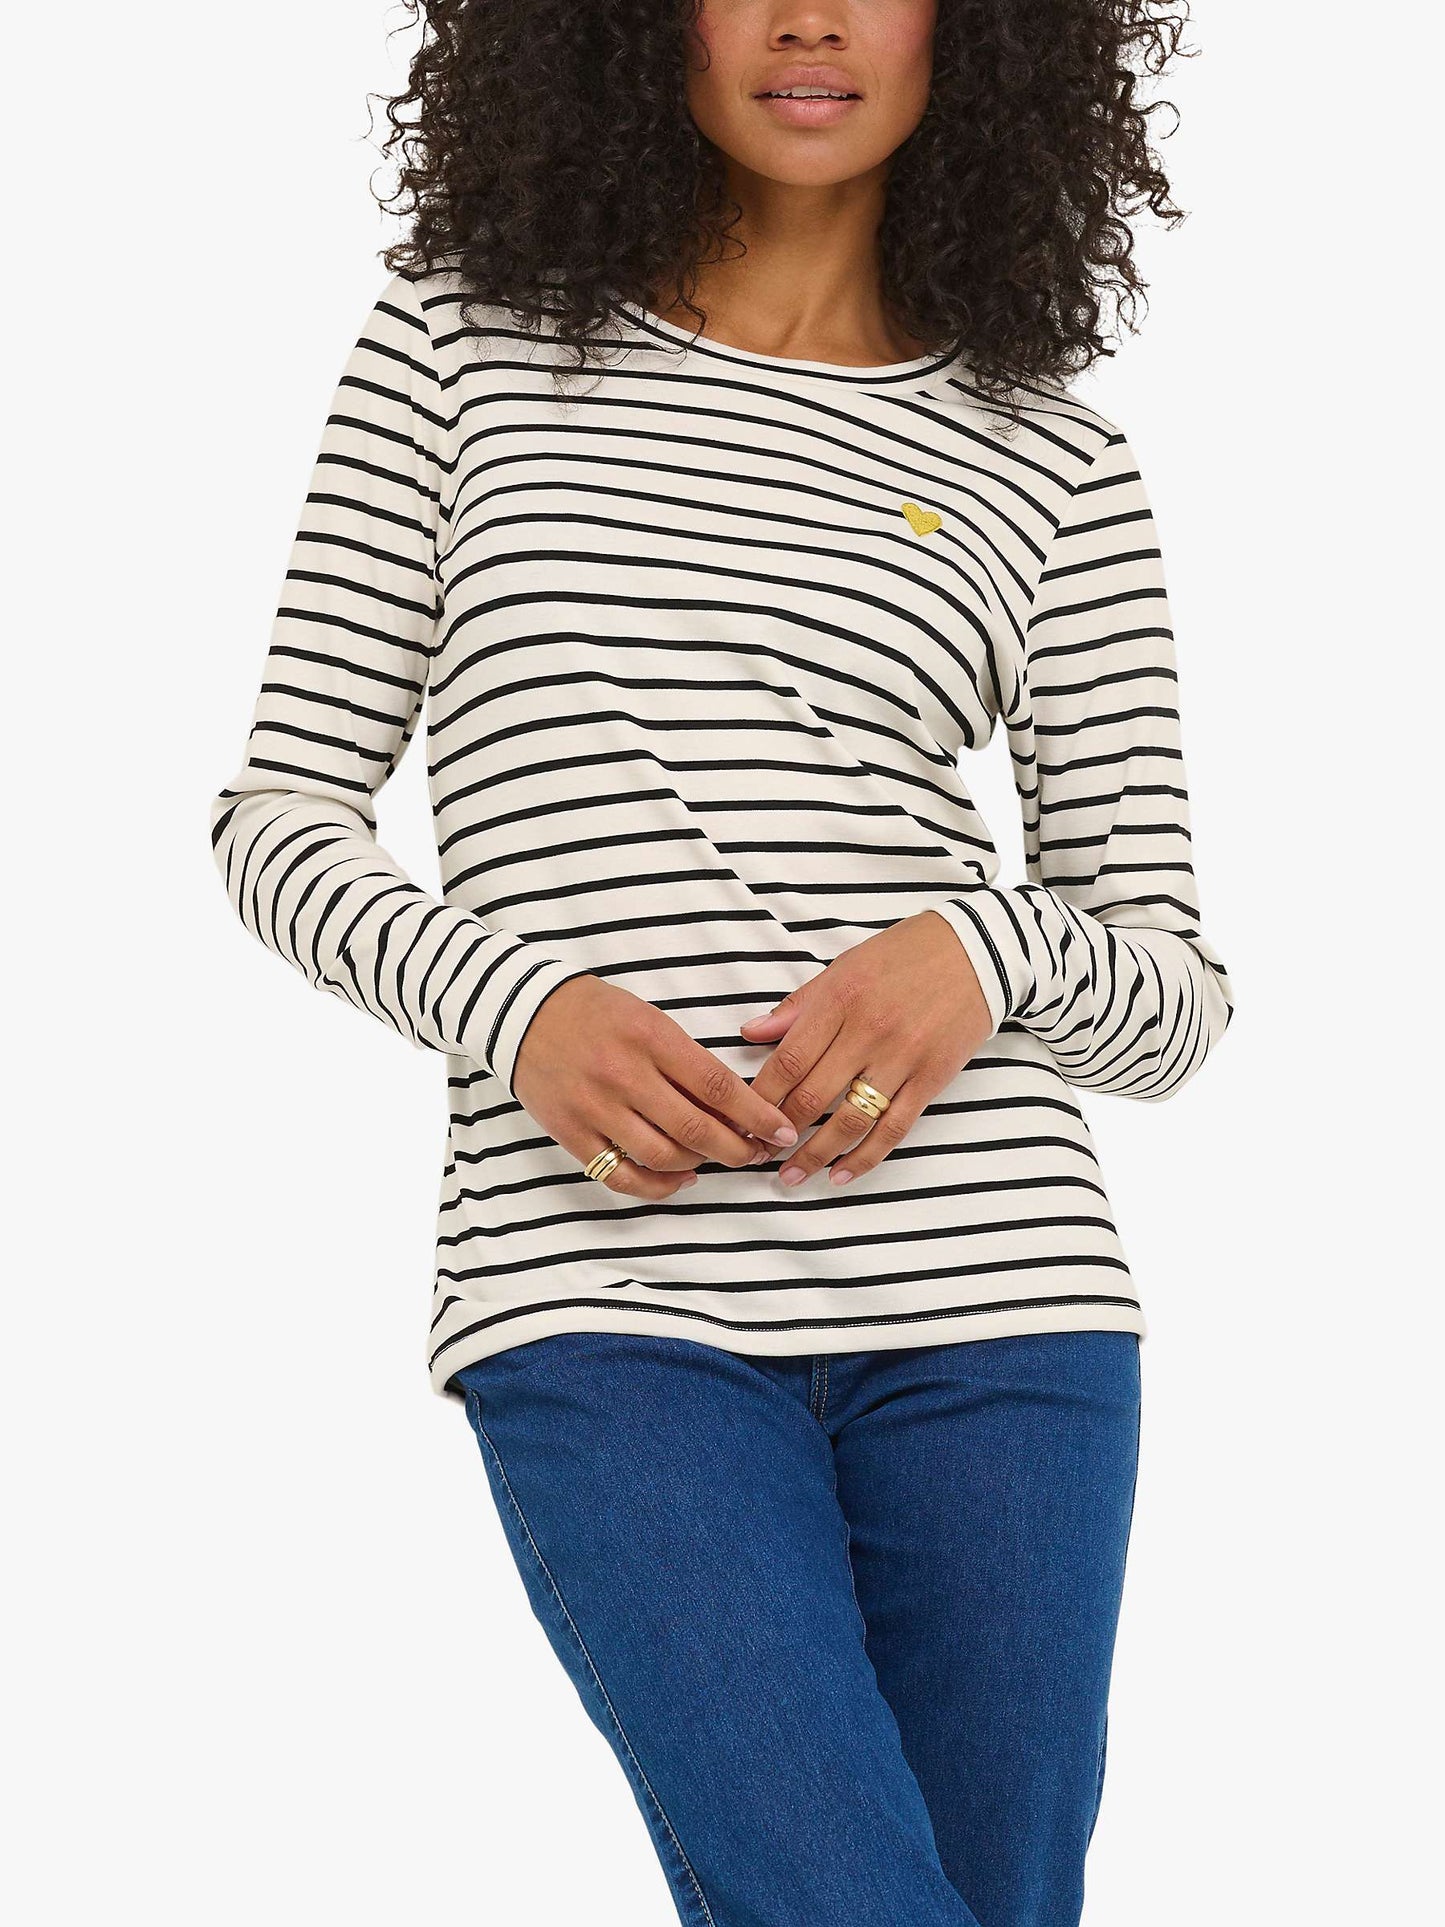 KAFFE Liddy Striped t-shirt in chalk and forest black with small gold heart